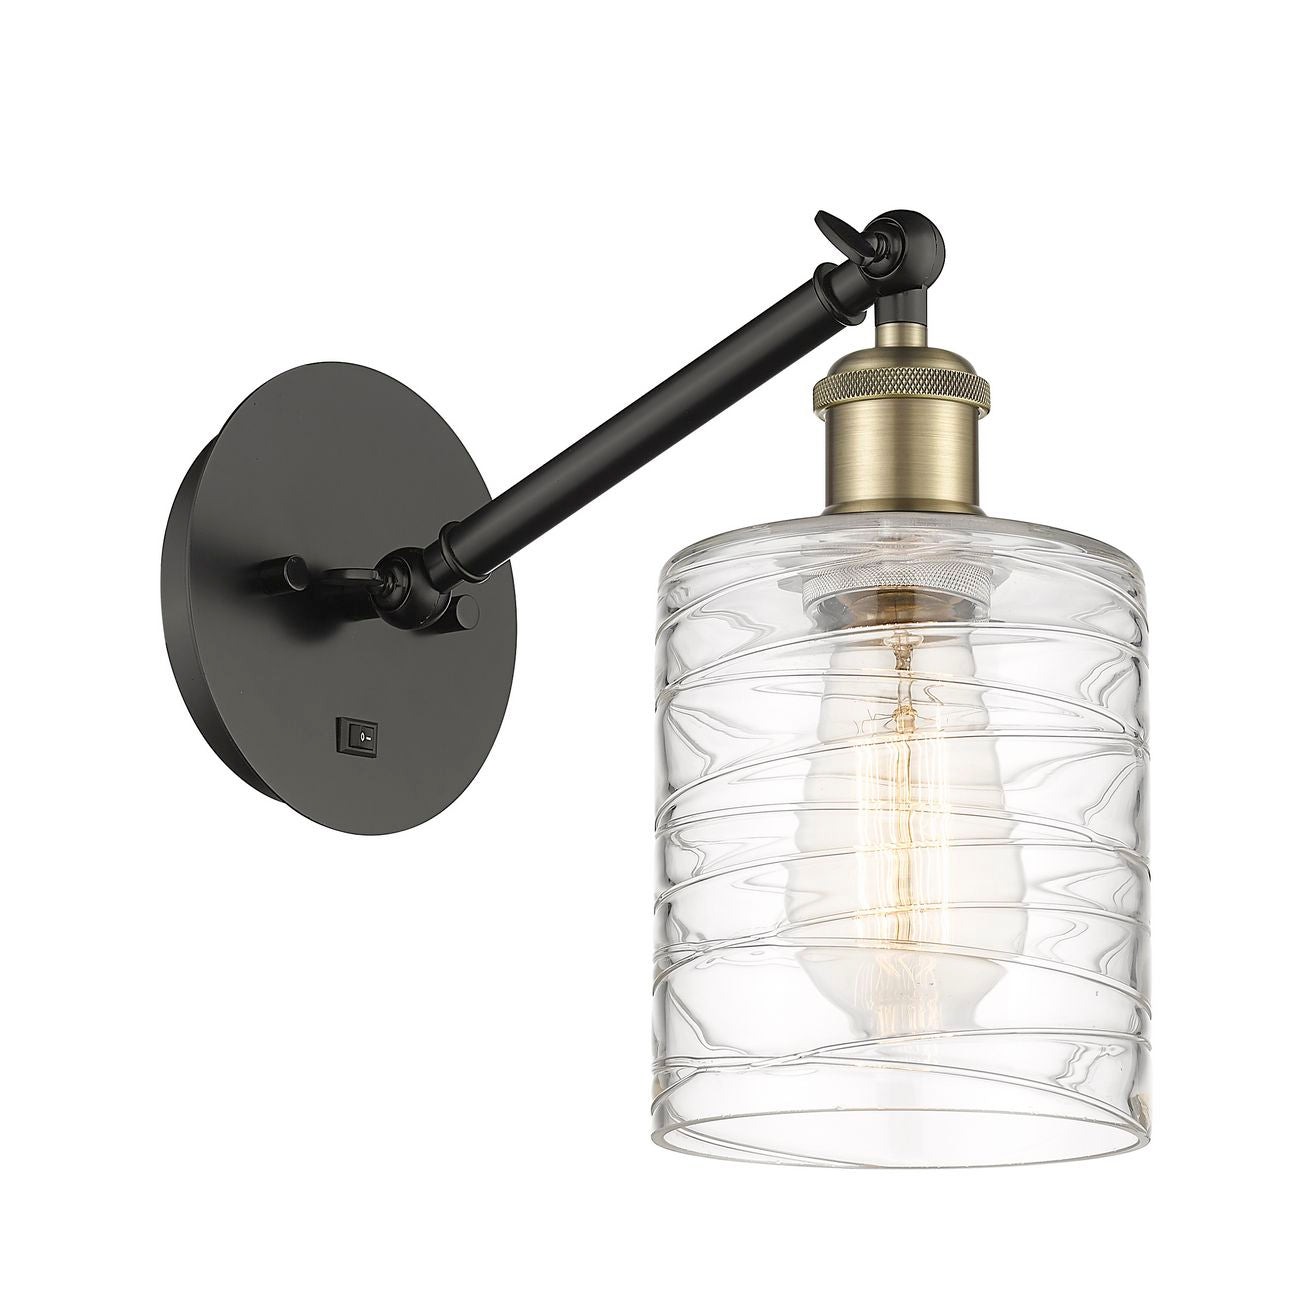 317-1W-BAB-G1113 1-Light 5.3" Black Antique Brass Sconce - Deco Swirl Cobbleskill Glass - LED Bulb - Dimmensions: 5.3 x 12.5 x 12.75 - Glass Up or Down: Yes